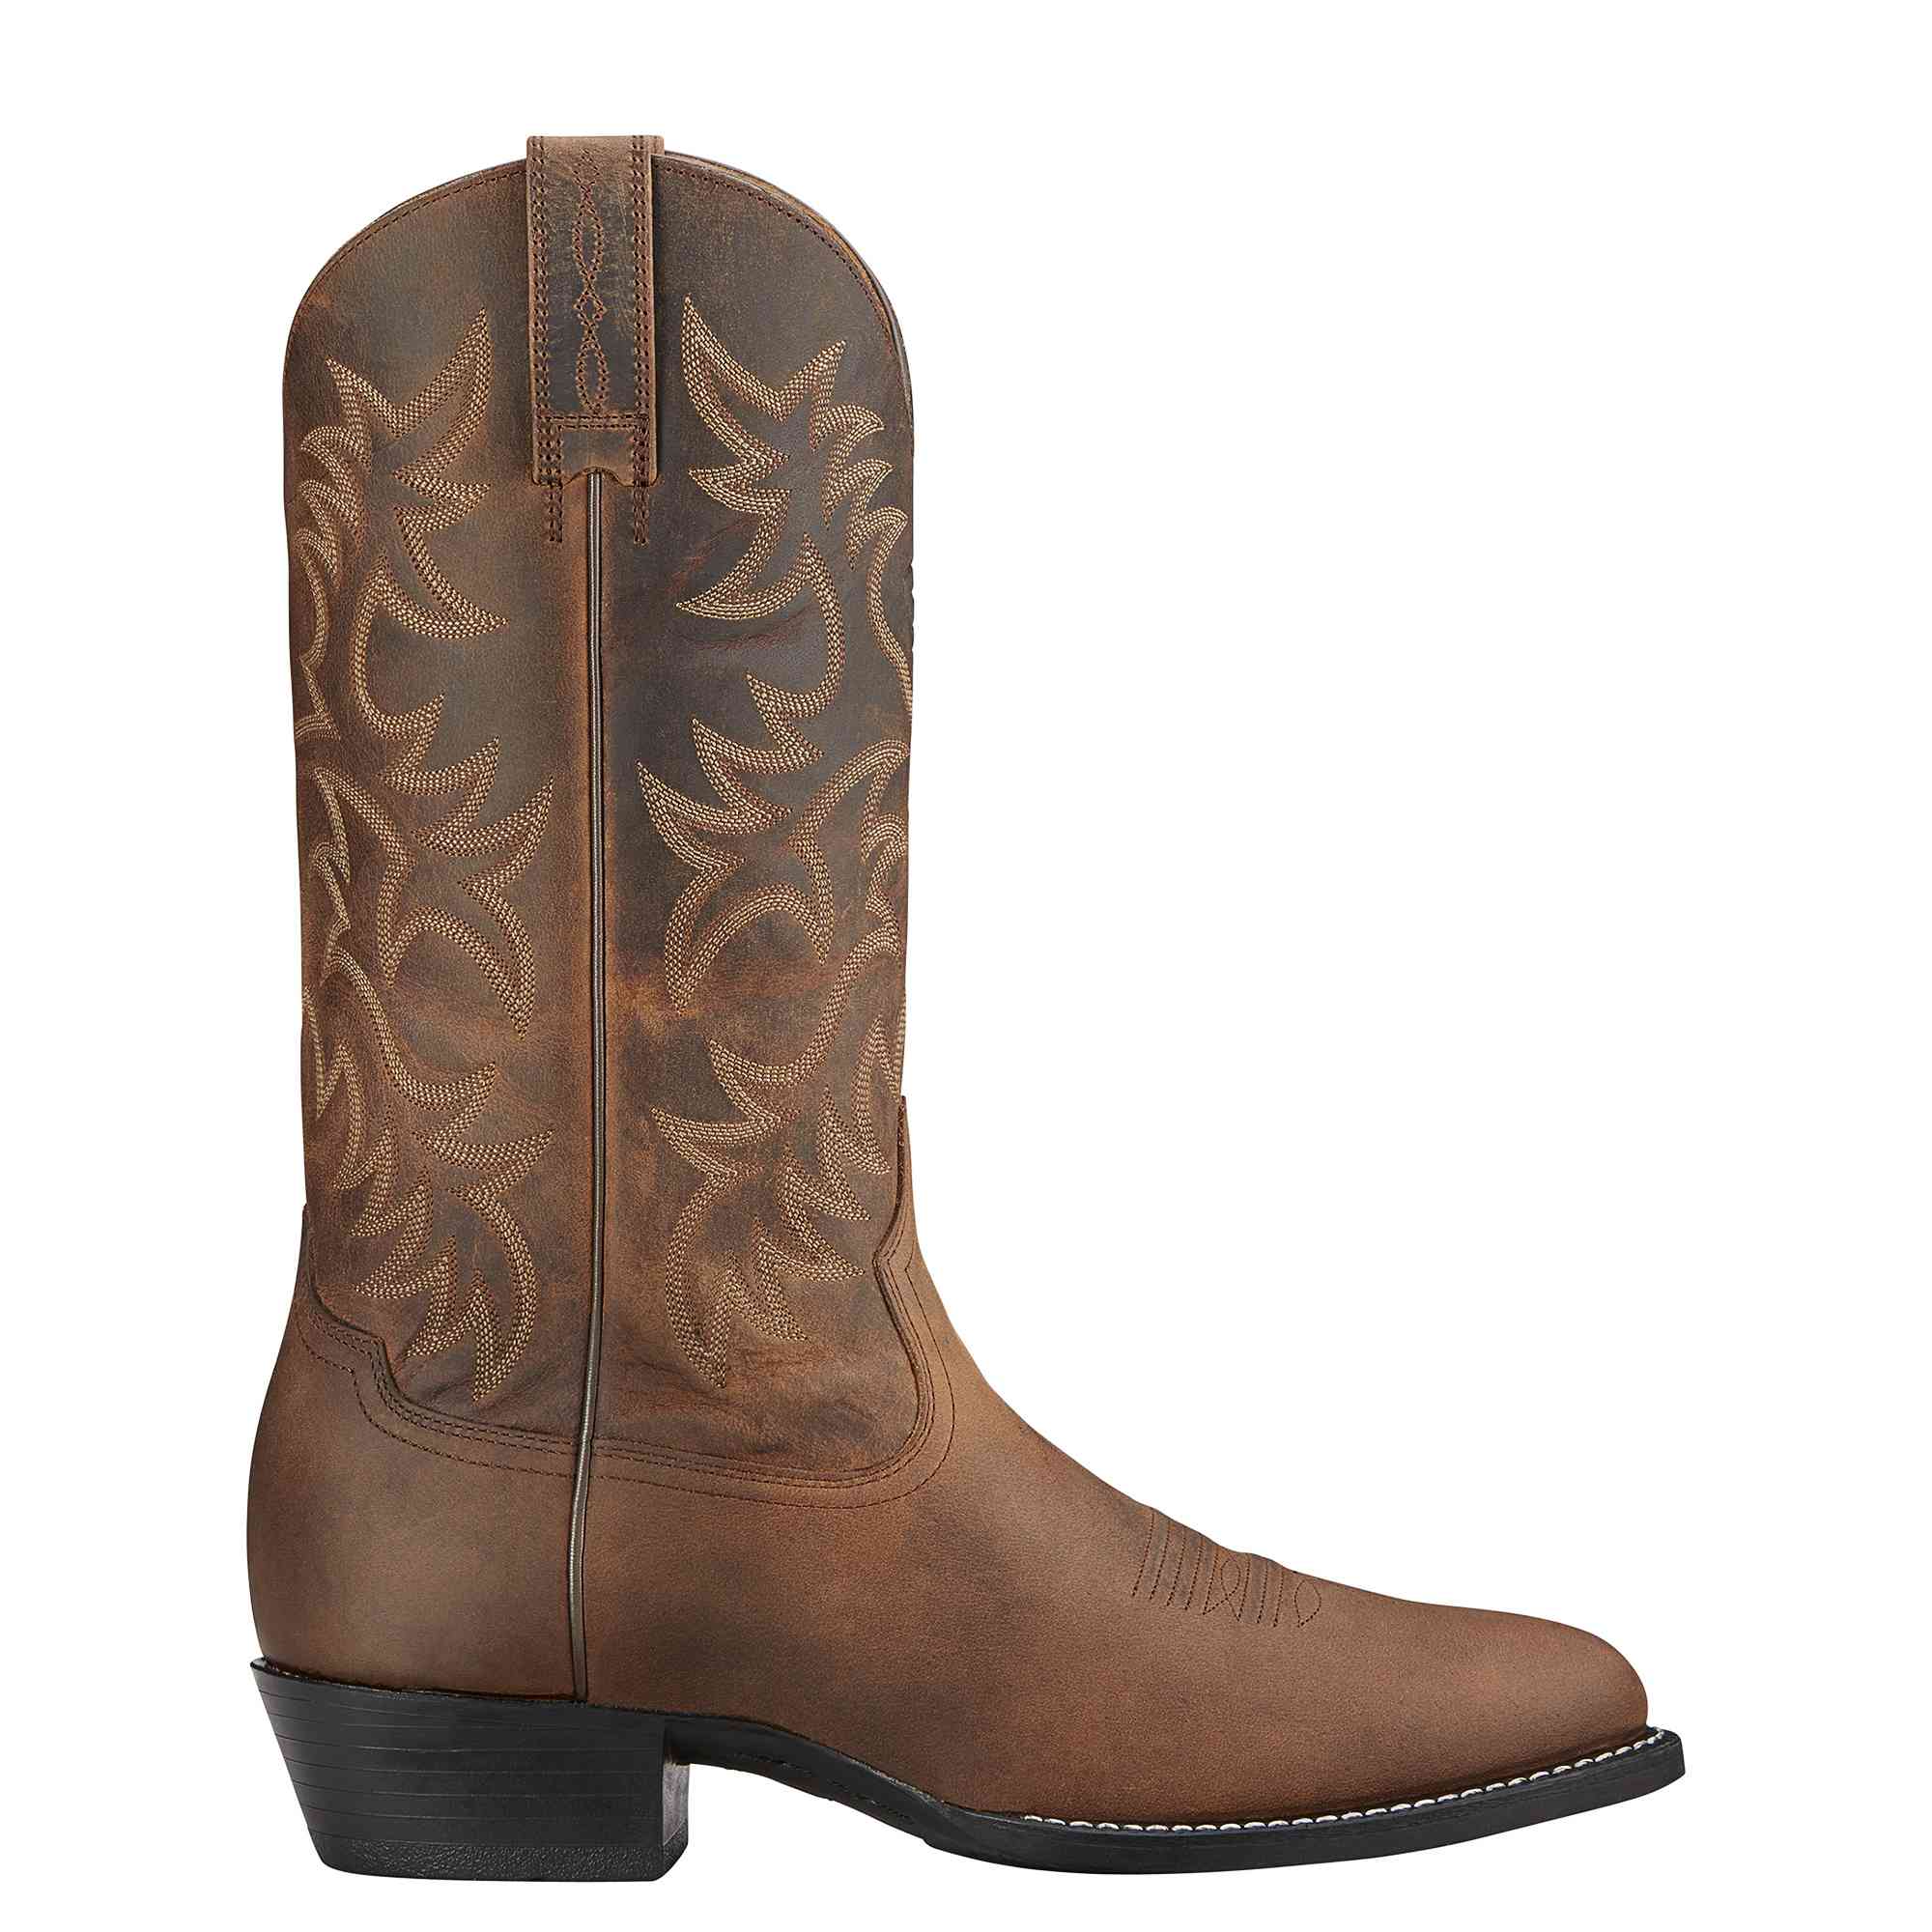 Ariat Distressed Brown R Western Boots 10002204 - Russell's Wear, Inc.